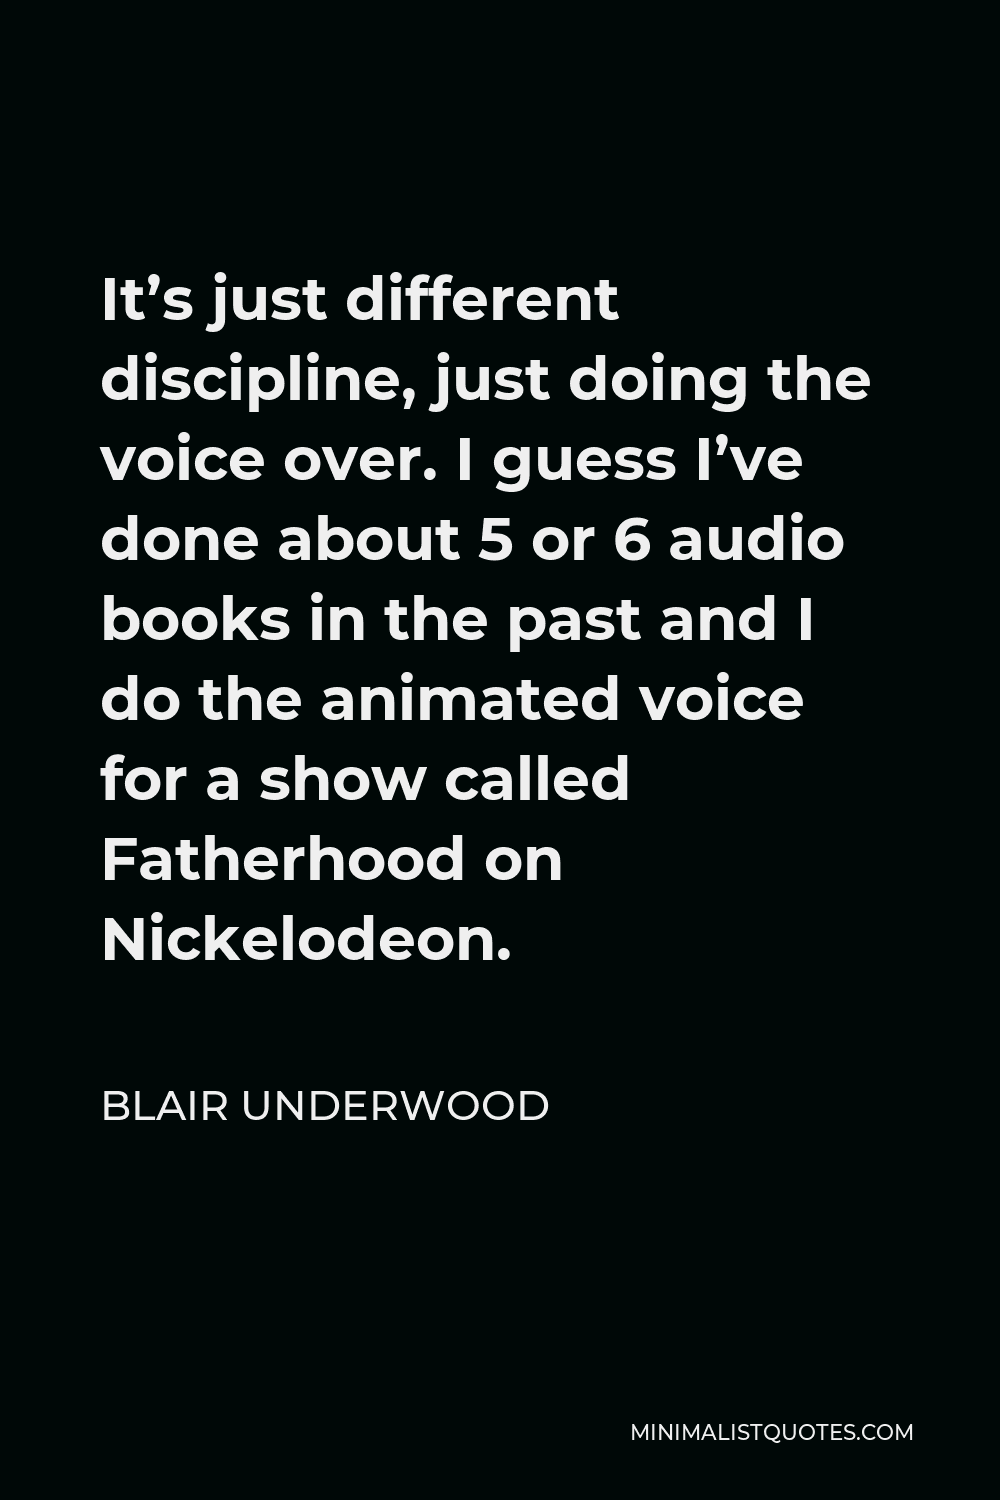 Blair Underwood Quote - It’s just different discipline, just doing the voice over. I guess I’ve done about 5 or 6 audio books in the past and I do the animated voice for a show called Fatherhood on Nickelodeon.